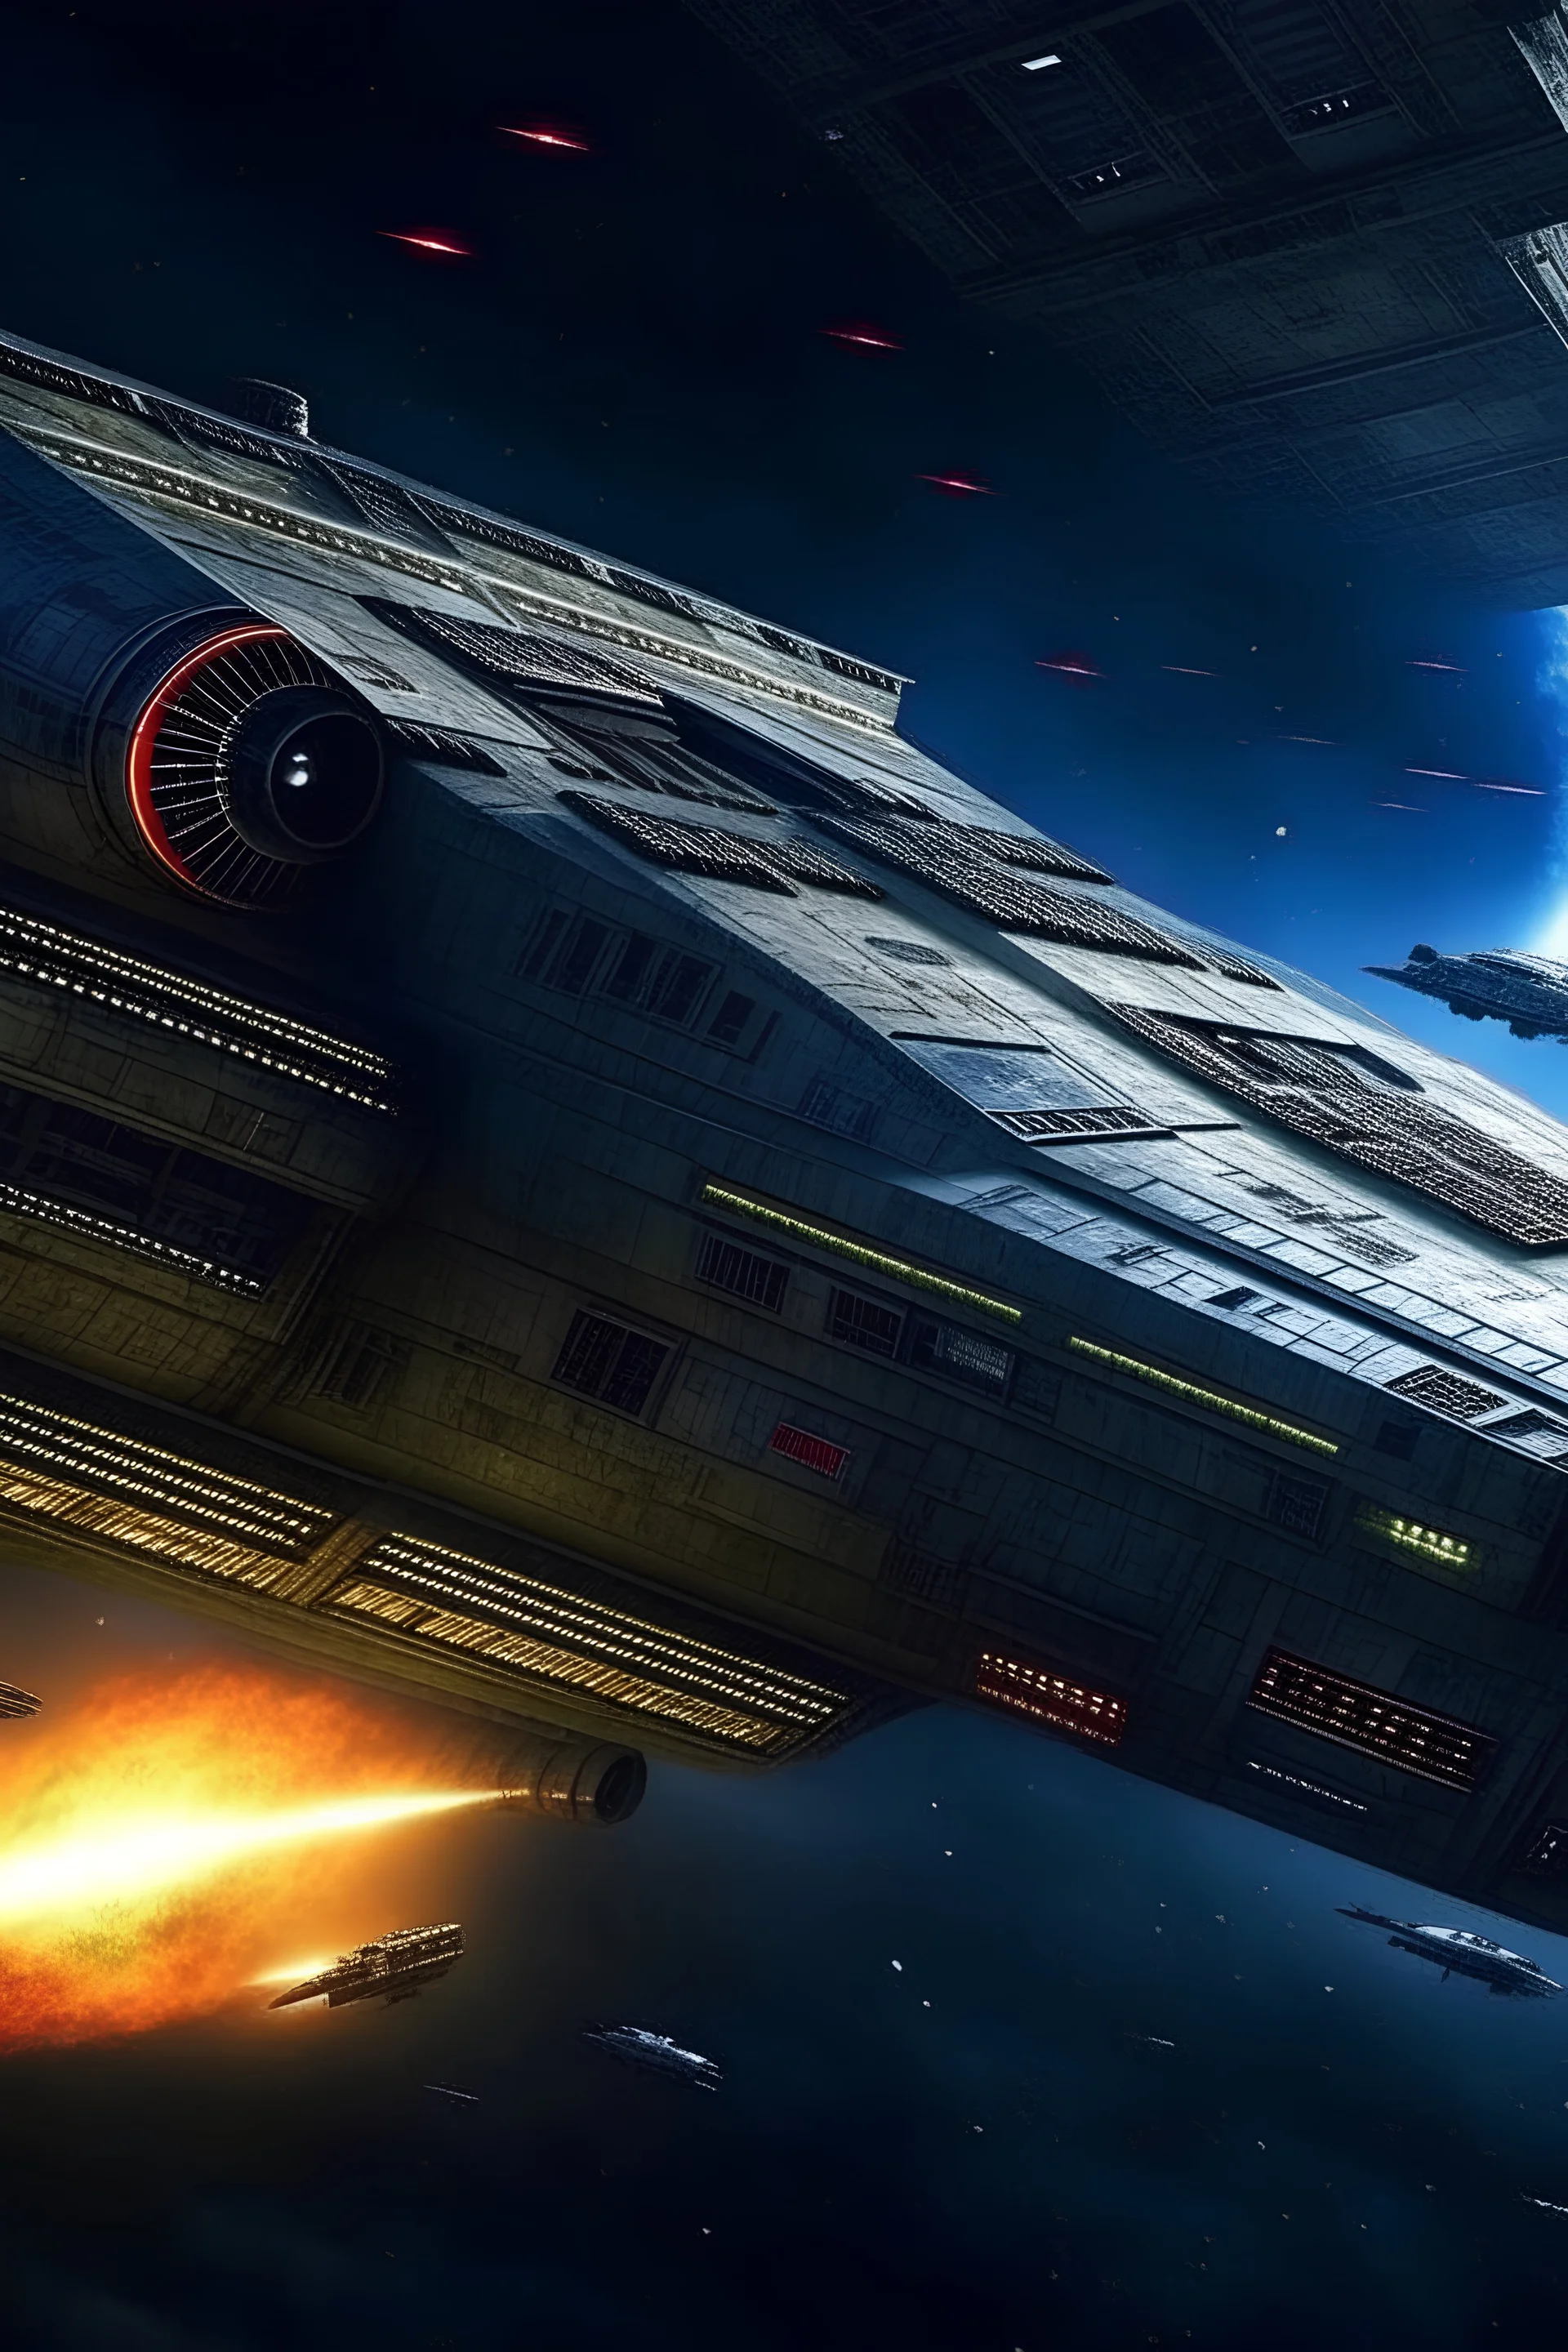 Star wars battle, flying ship, space, realistic